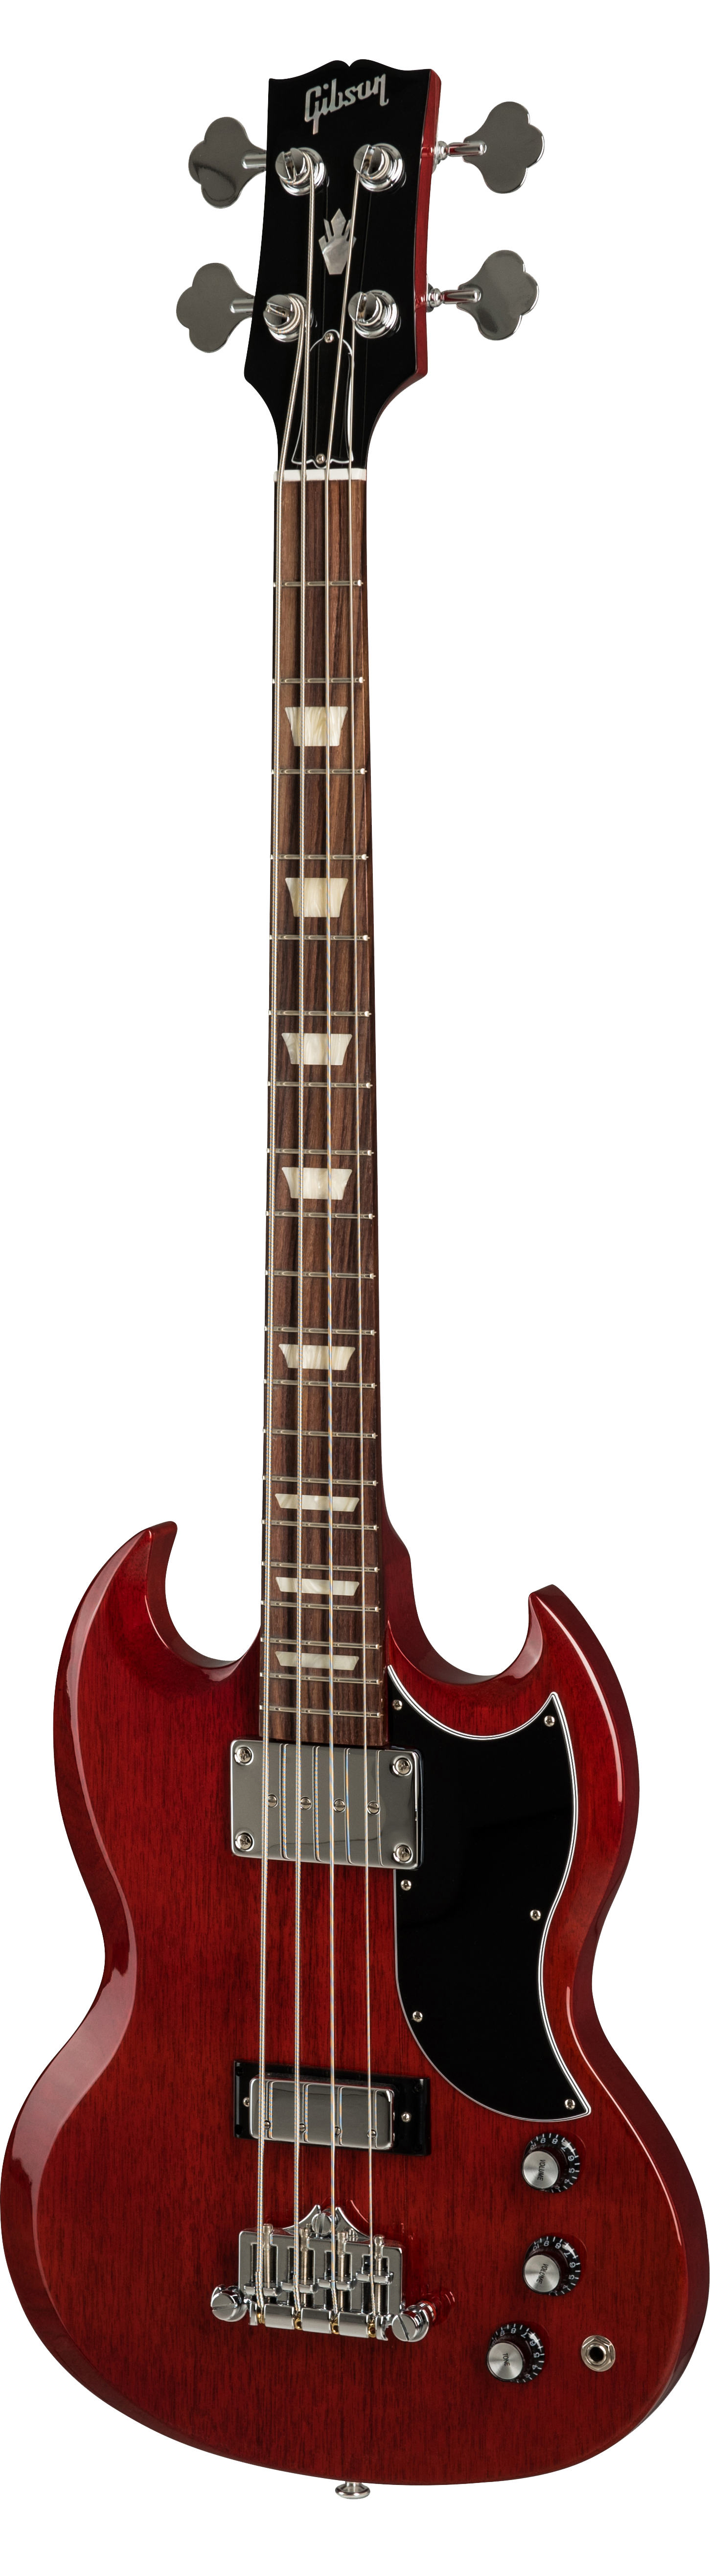 Full frontal of Gibson SG Standard Bass Heritage Cherry.